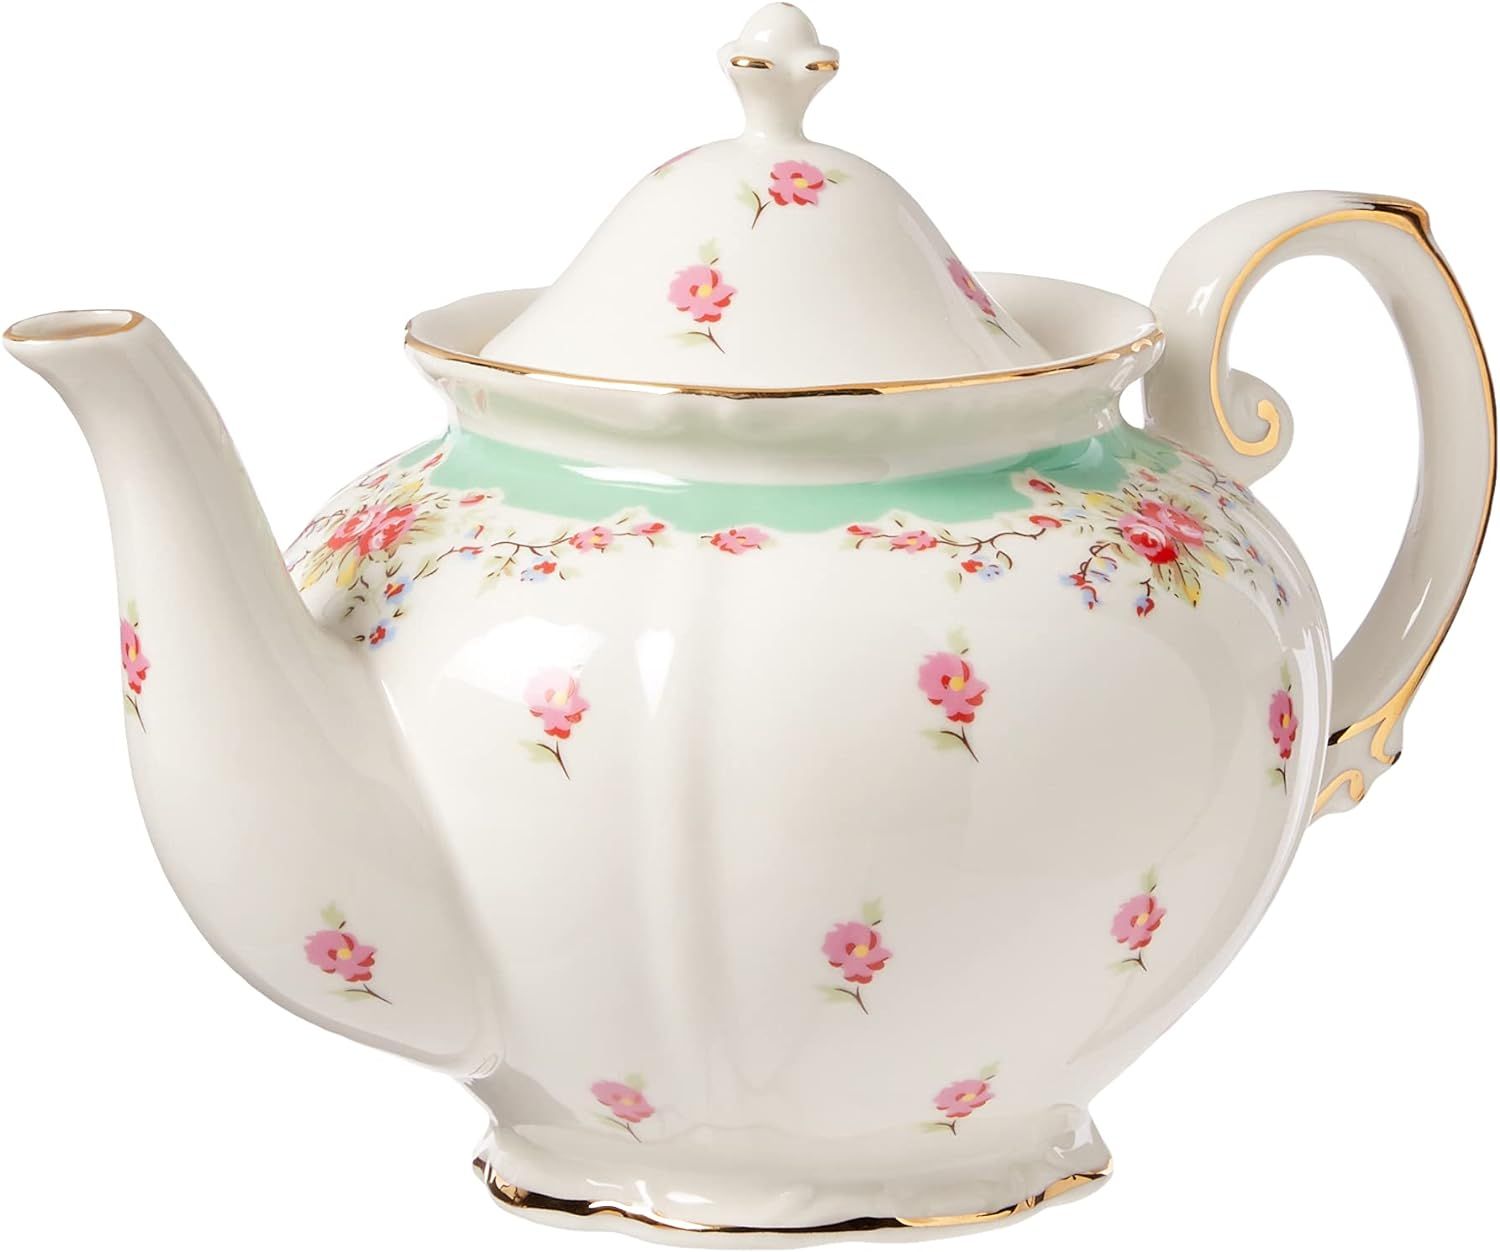 Gracie China by Coastline Imports Green 5-Cup Gracie China Vintage Rose Porcelain Teapot | Amazon (US)